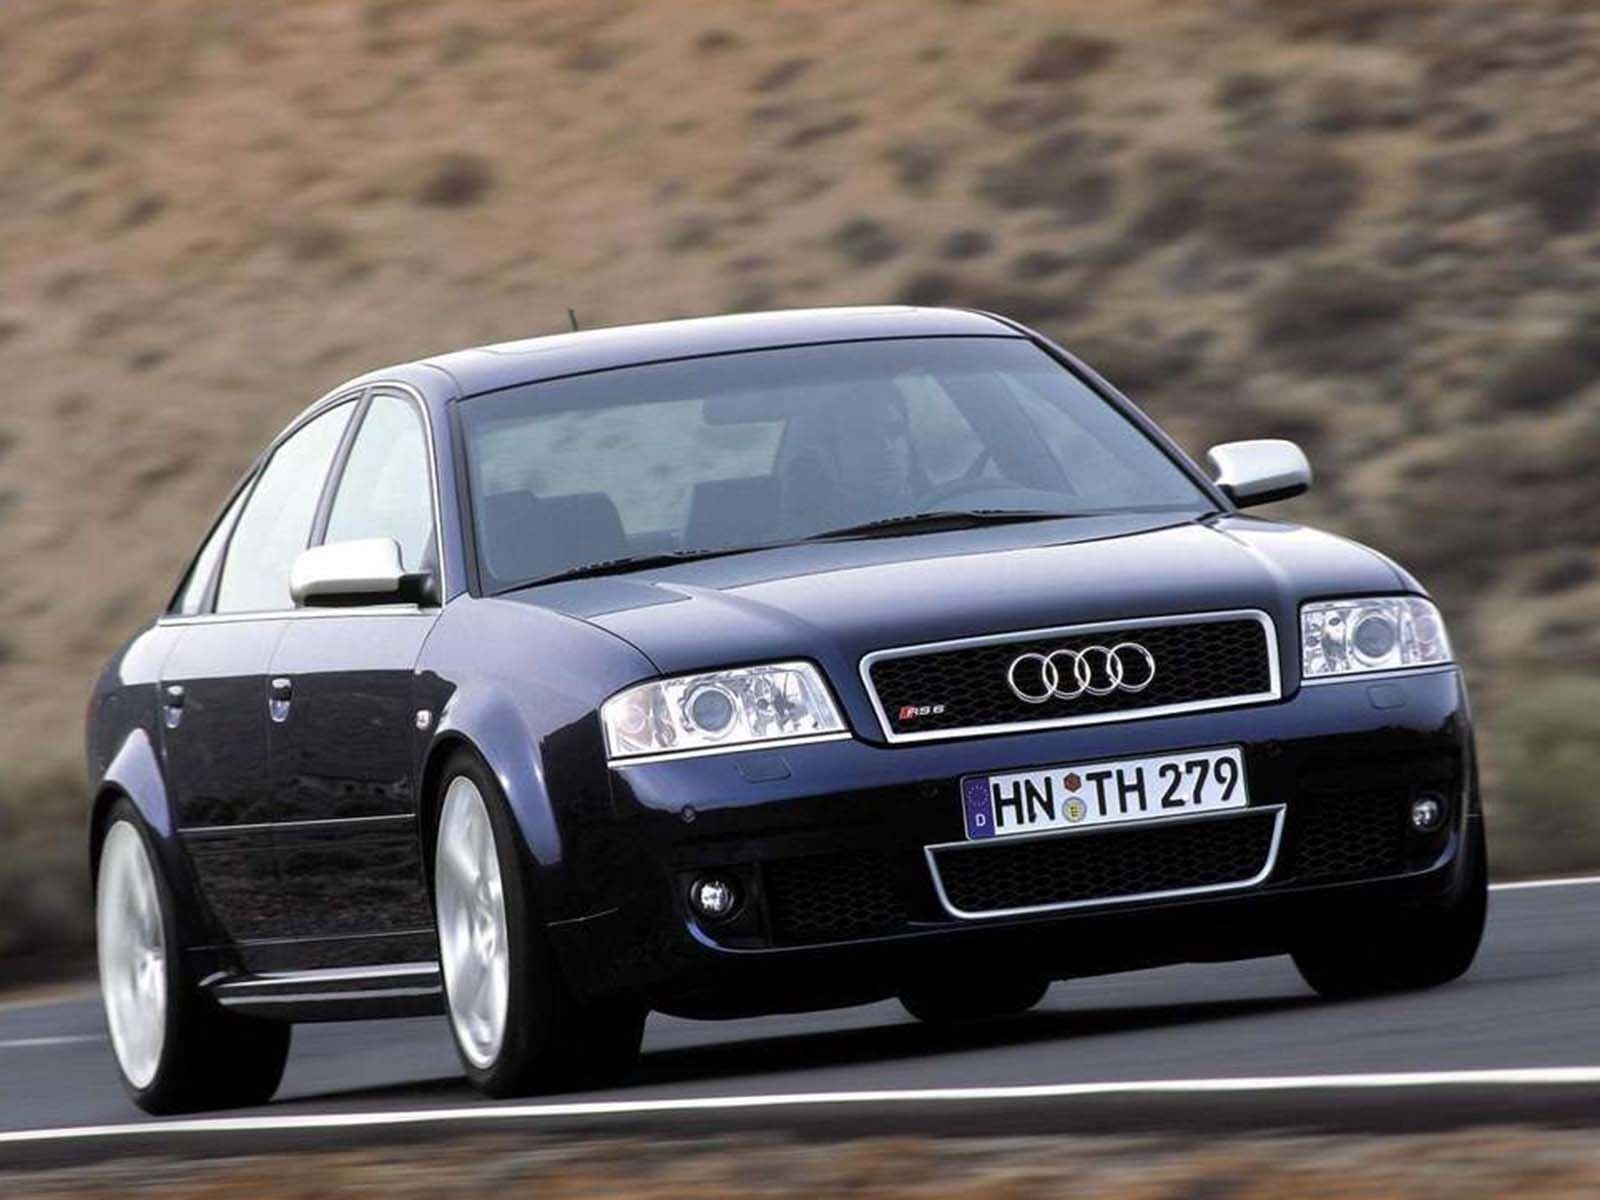 2003 Audi RS6 on the road